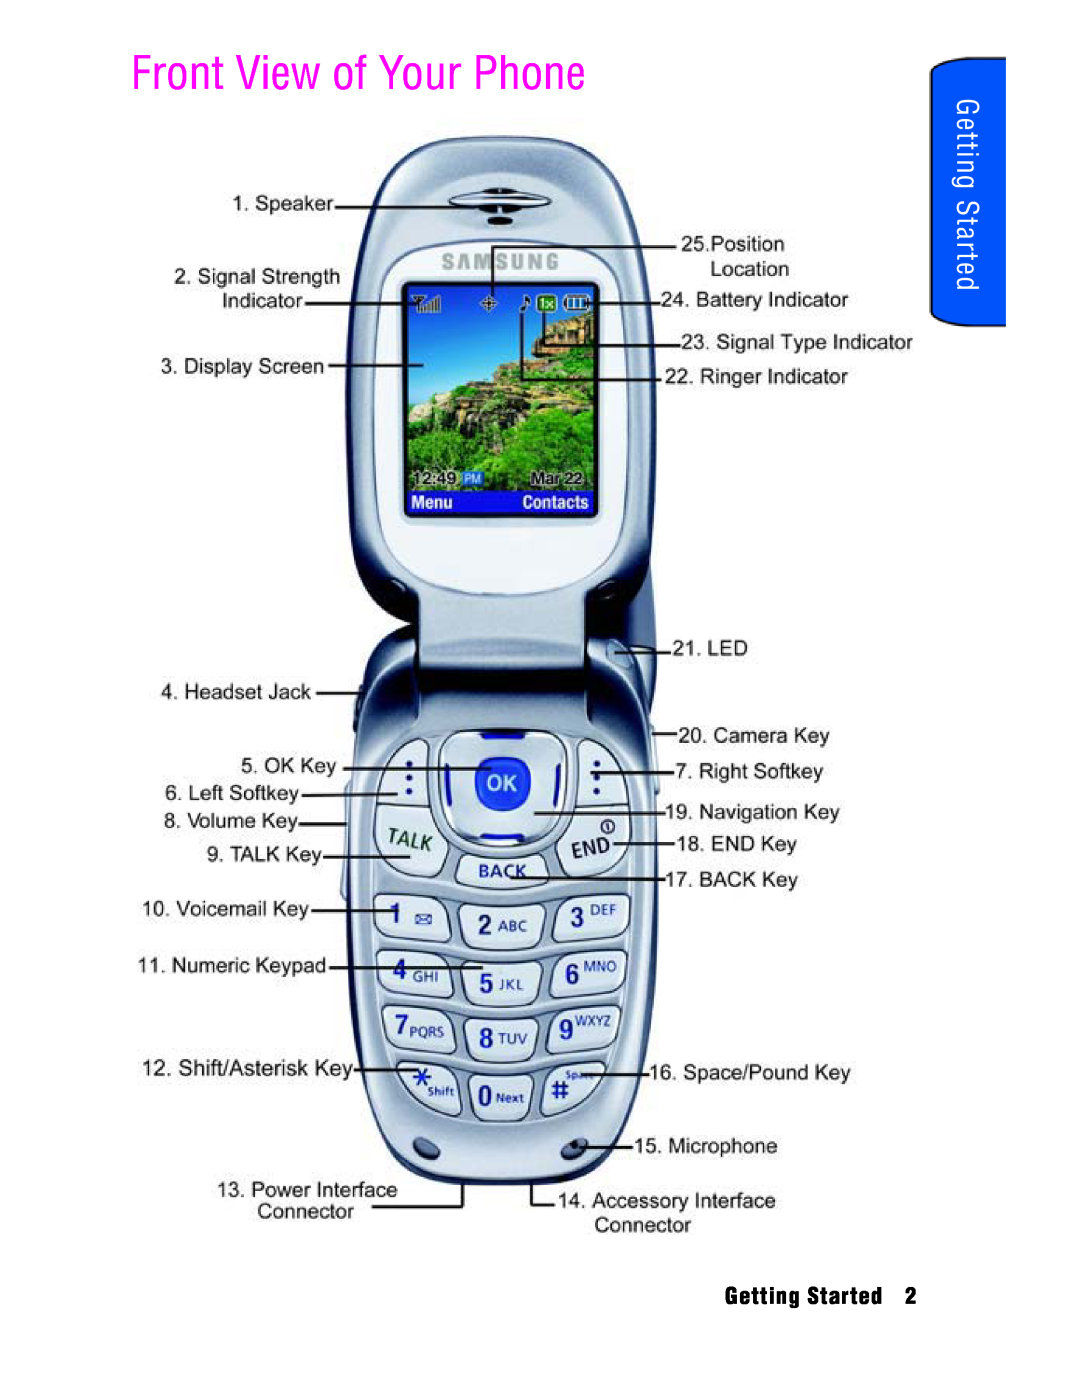 Samsung SPH-a740 manual Front View of Your Phone, Getting Started 